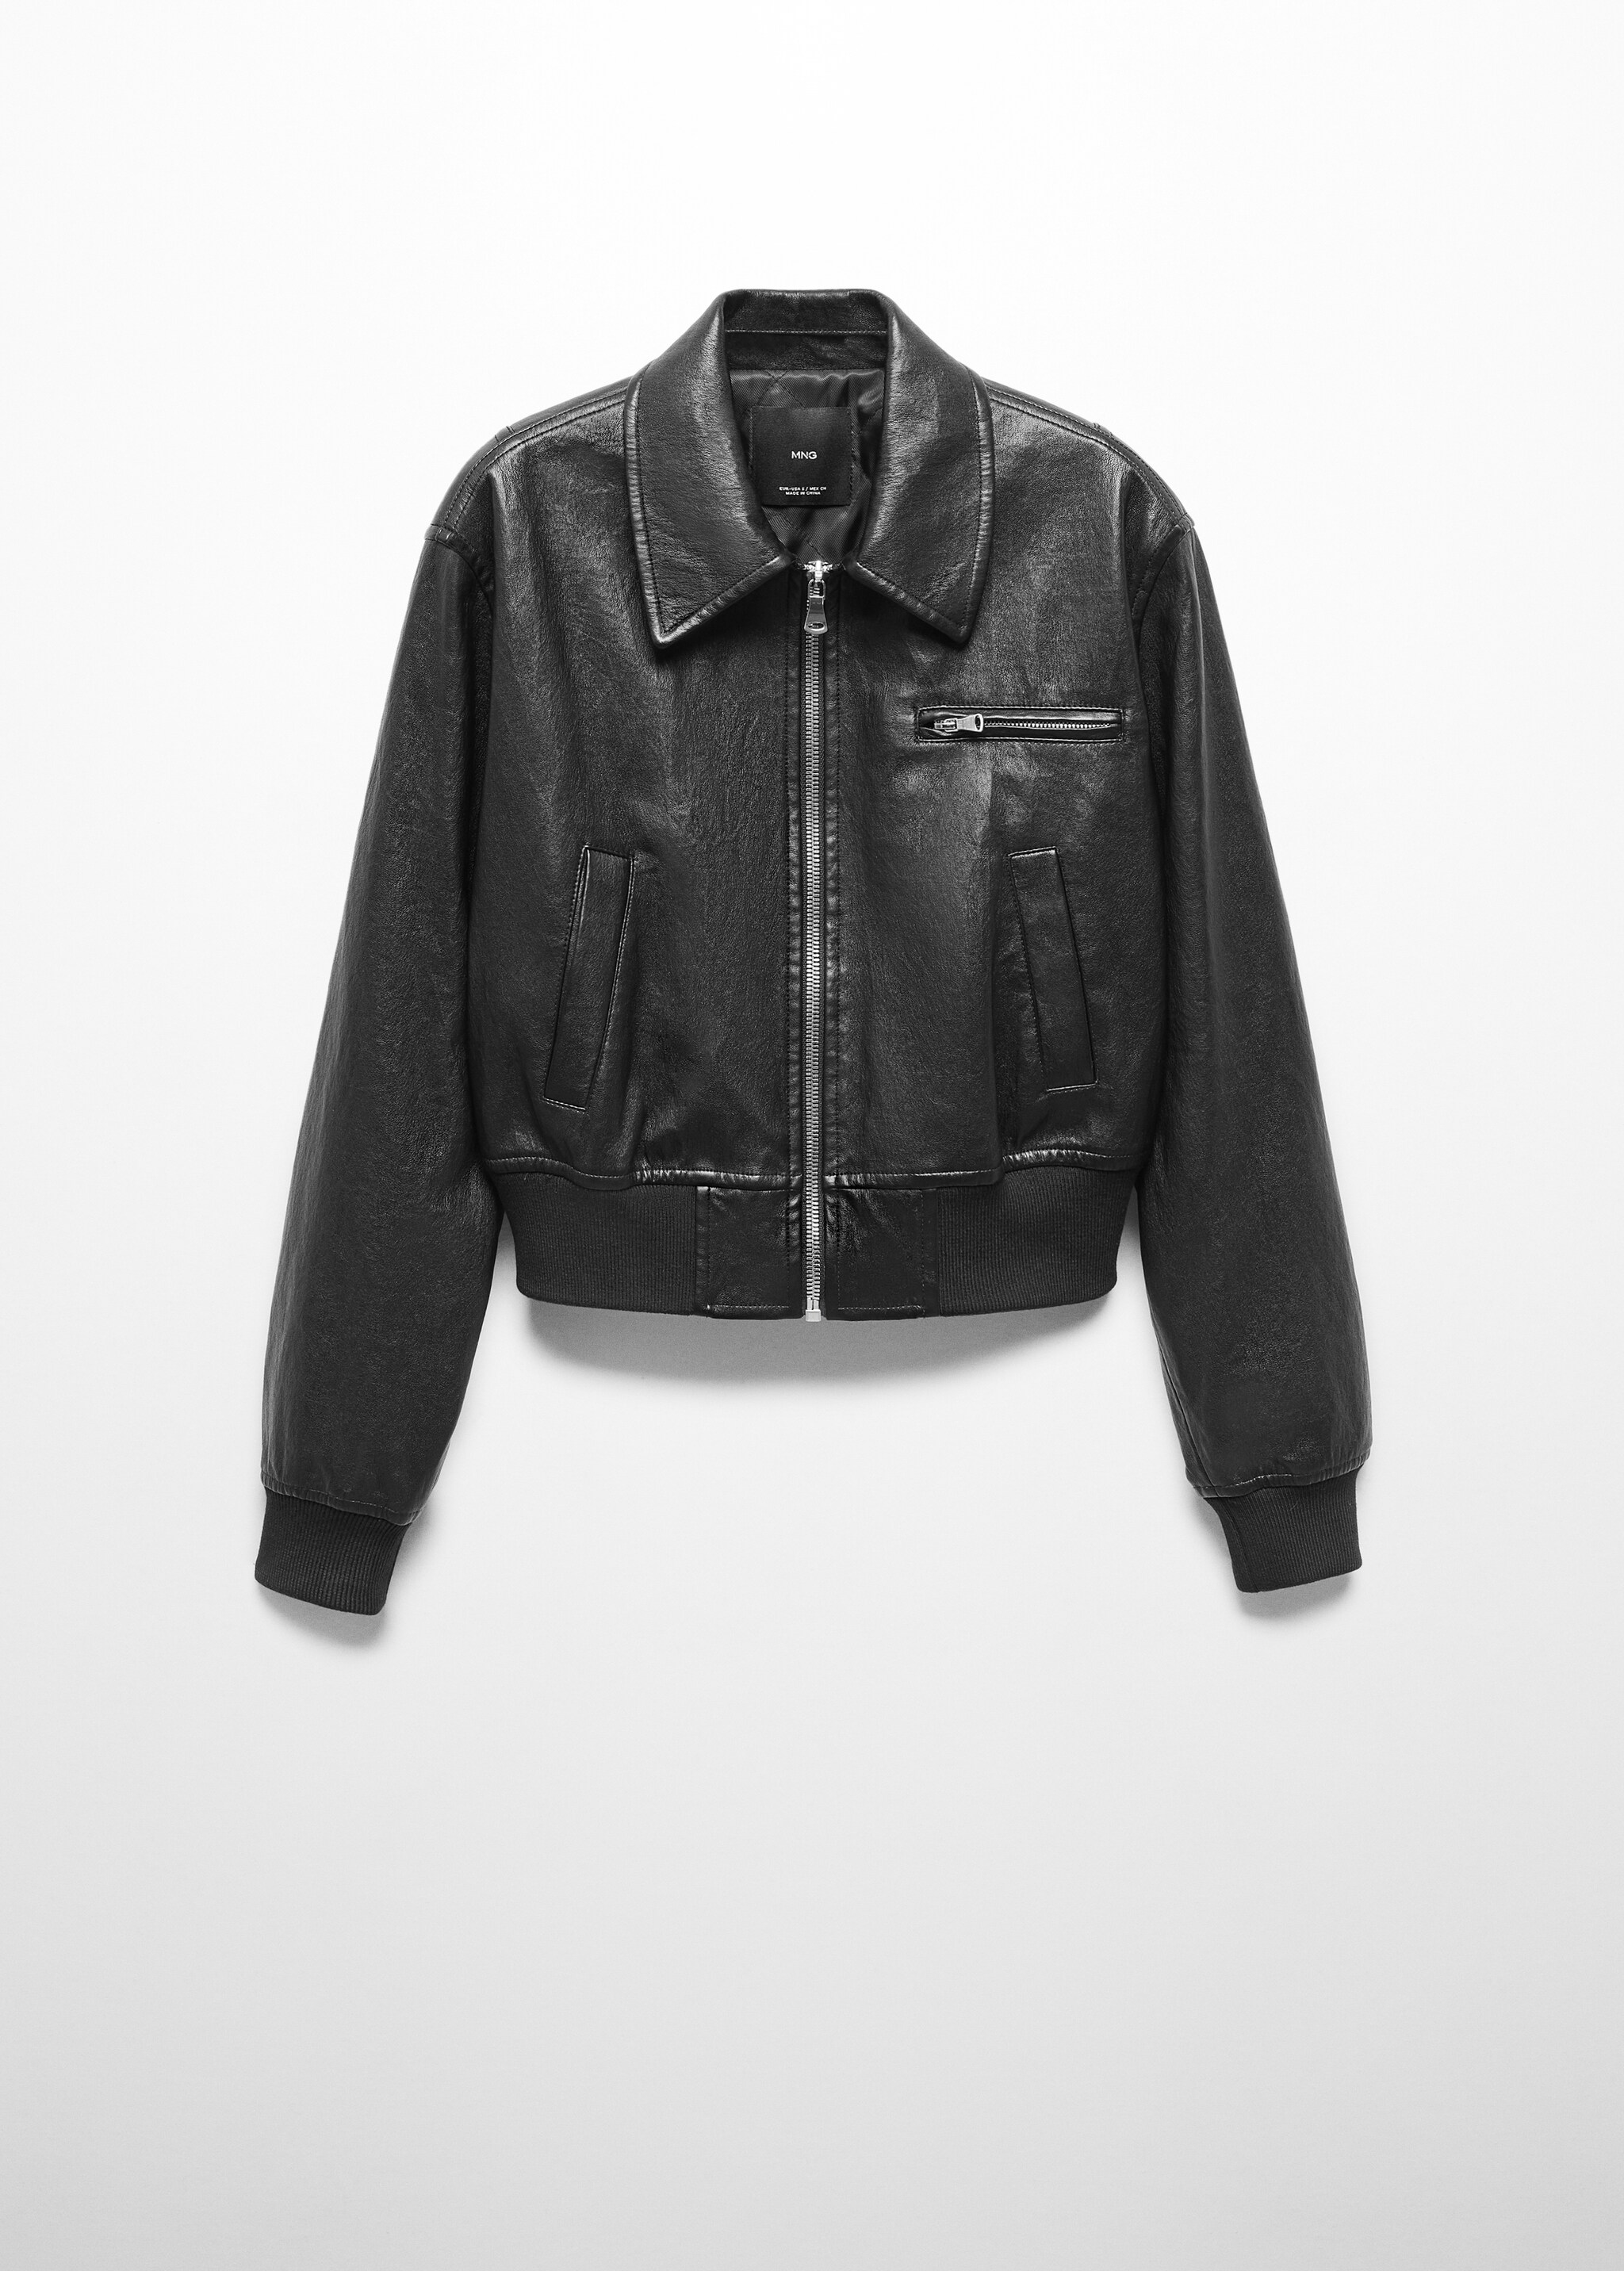 Vintage leather-effect jacket - Article without model